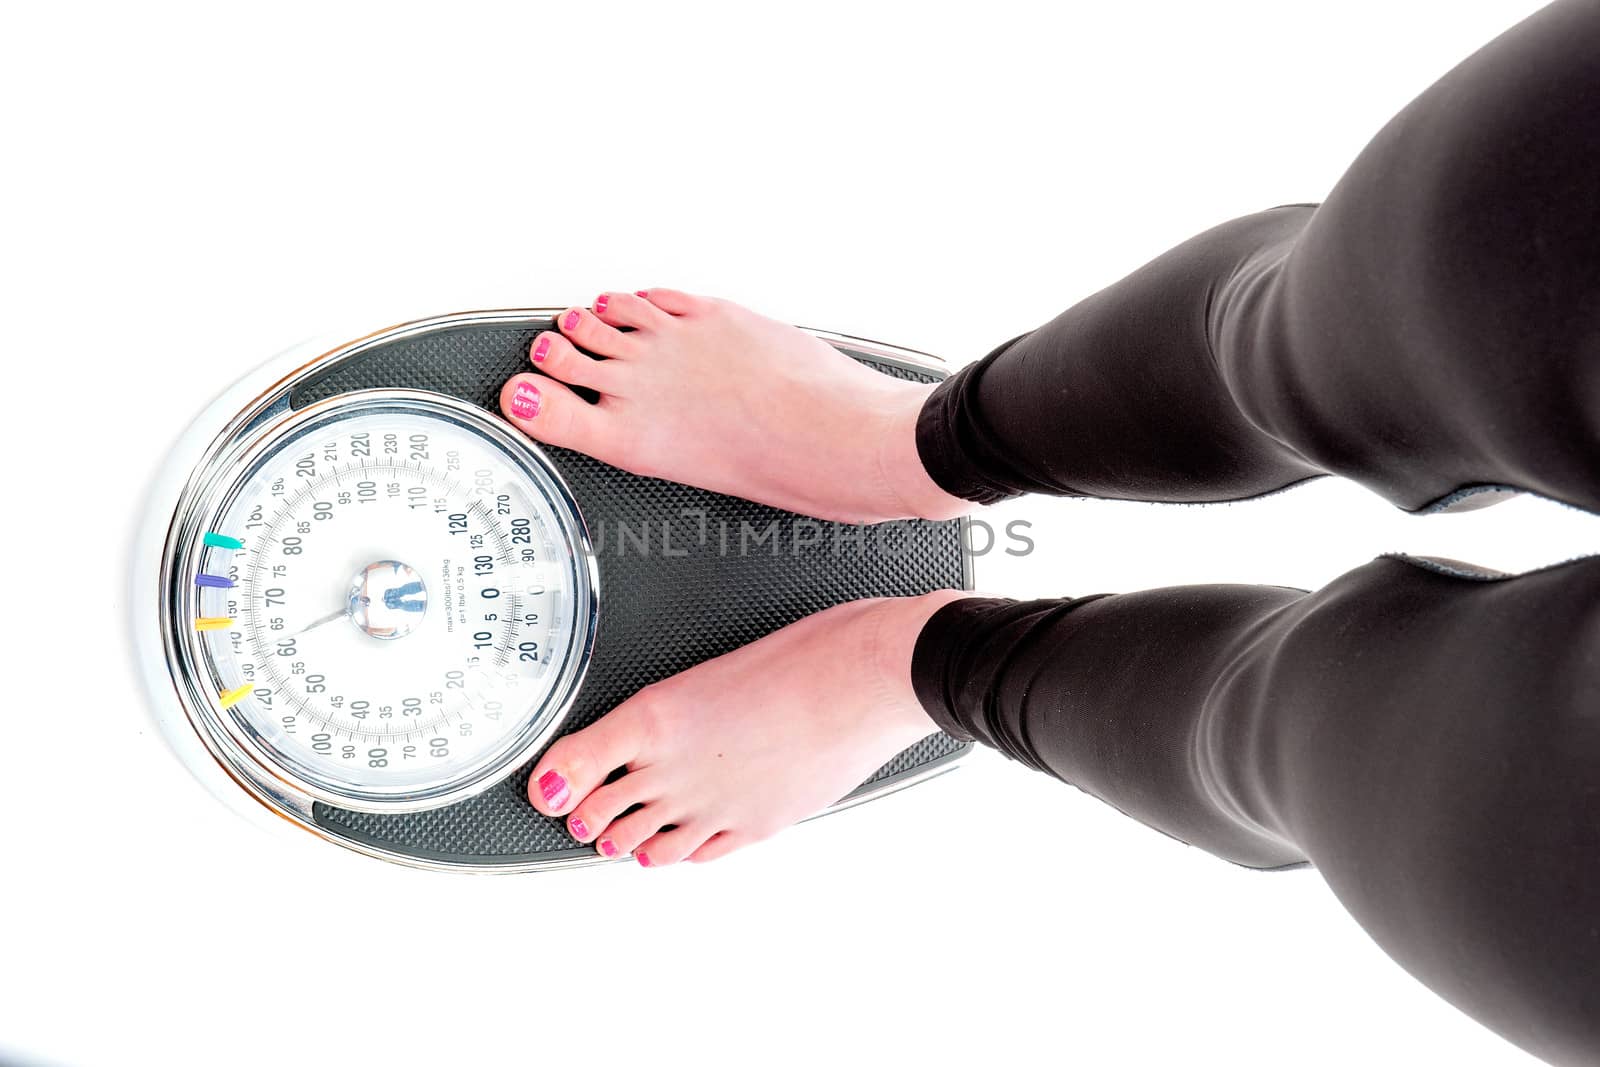 Standing on a weigh scale on a white background